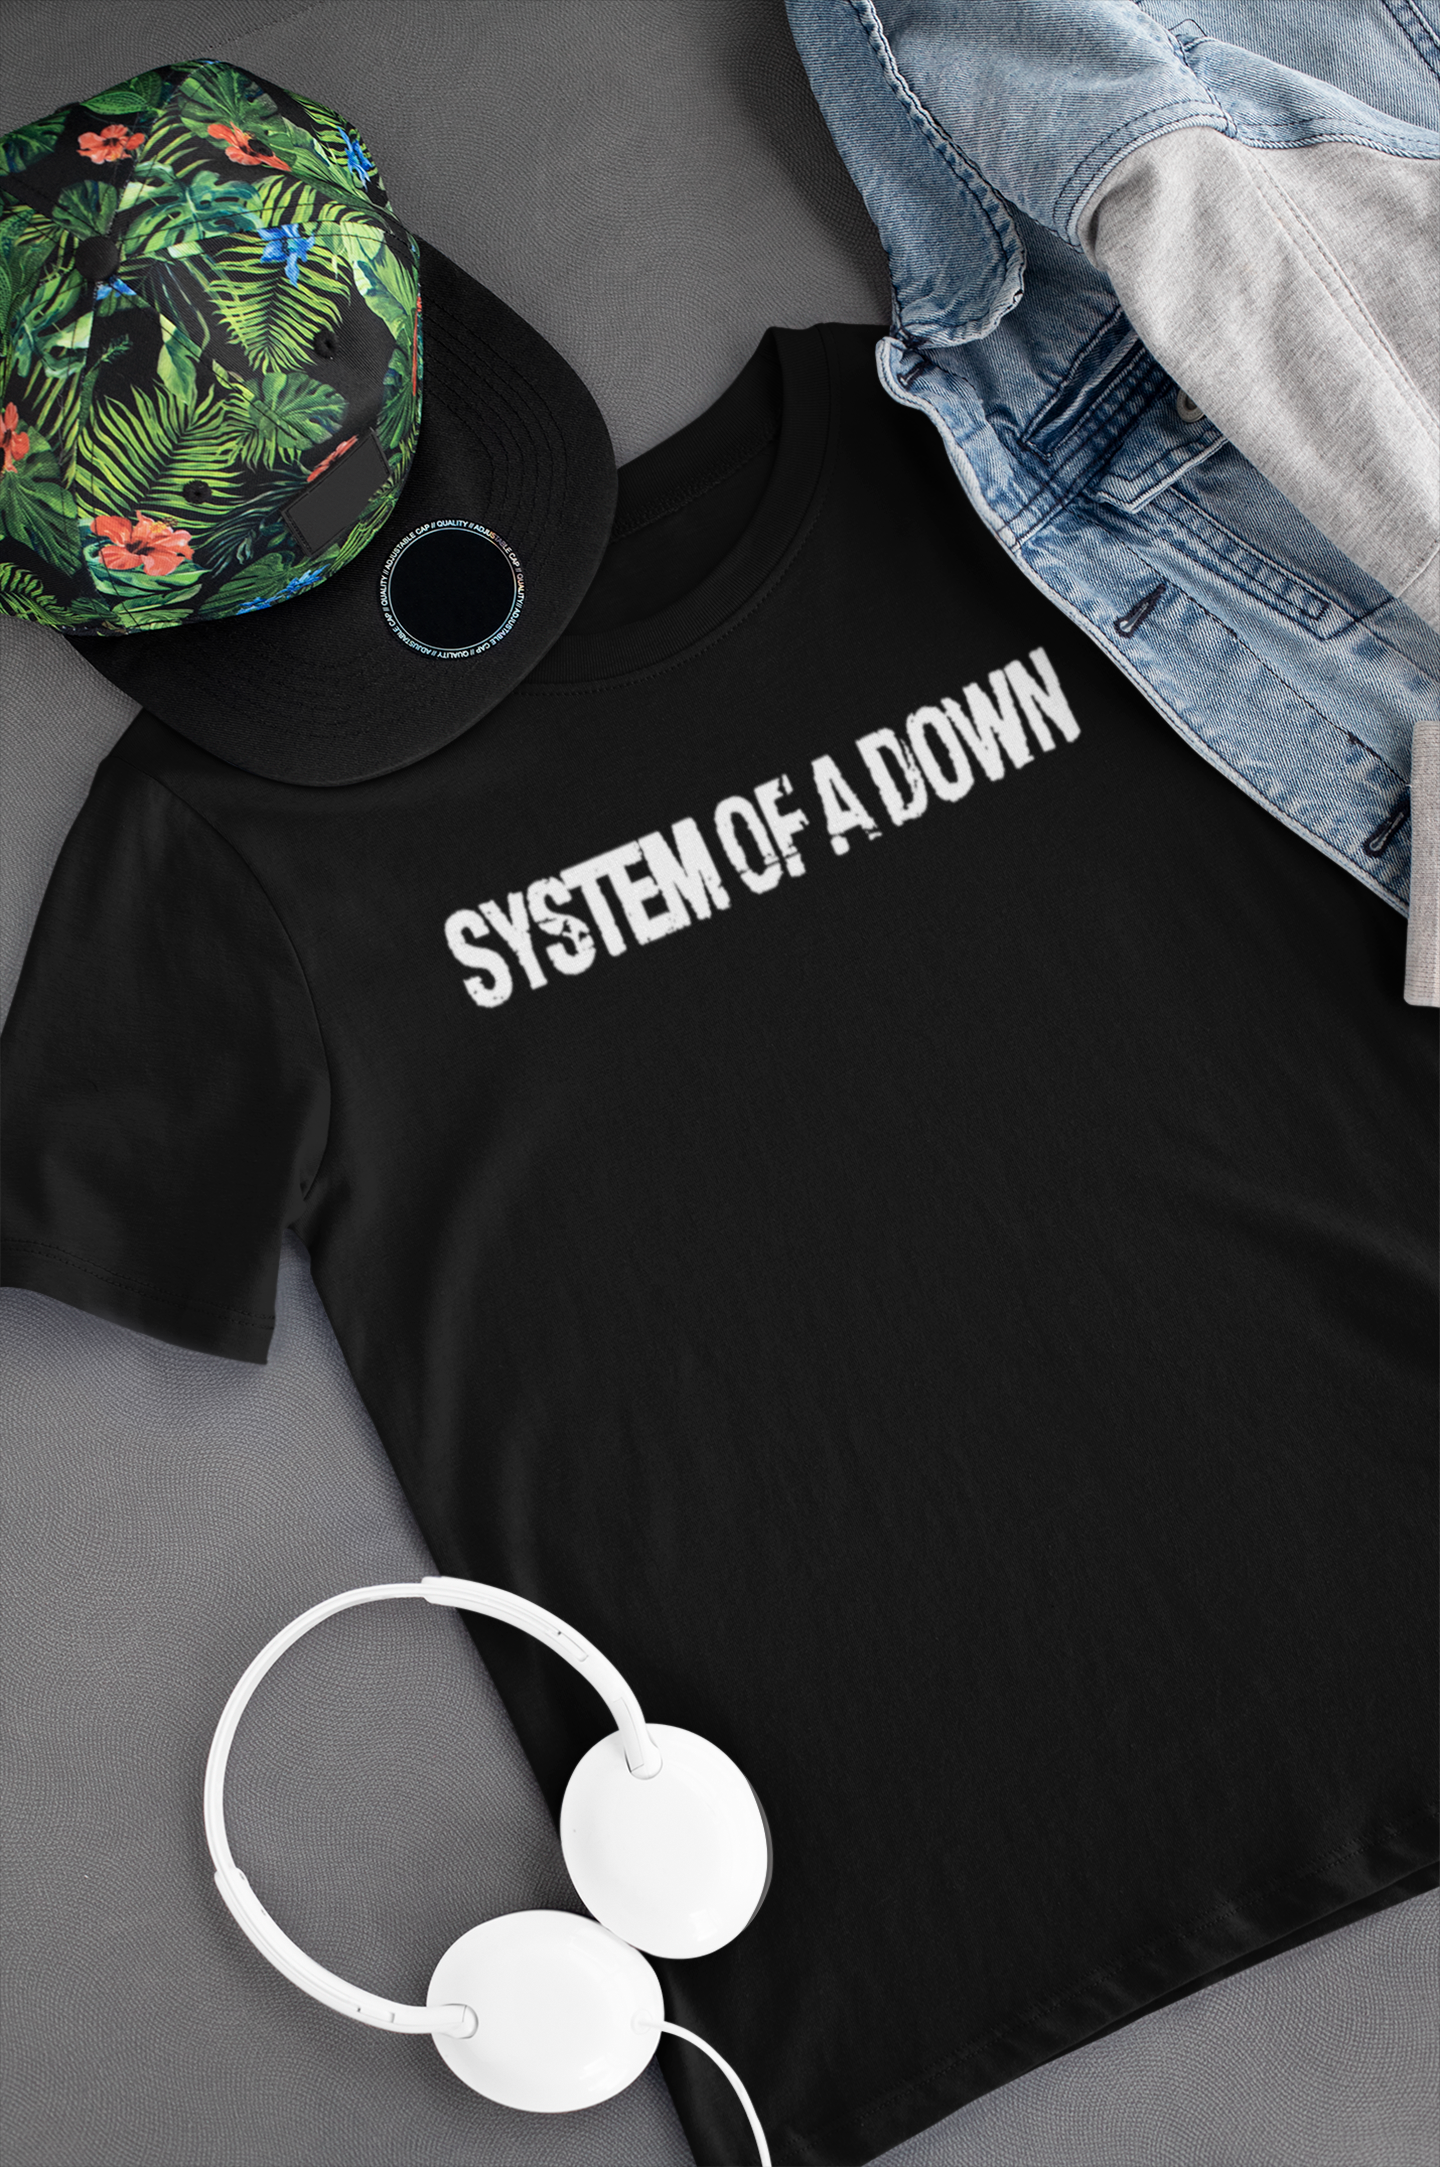 Camiseta System of a Down